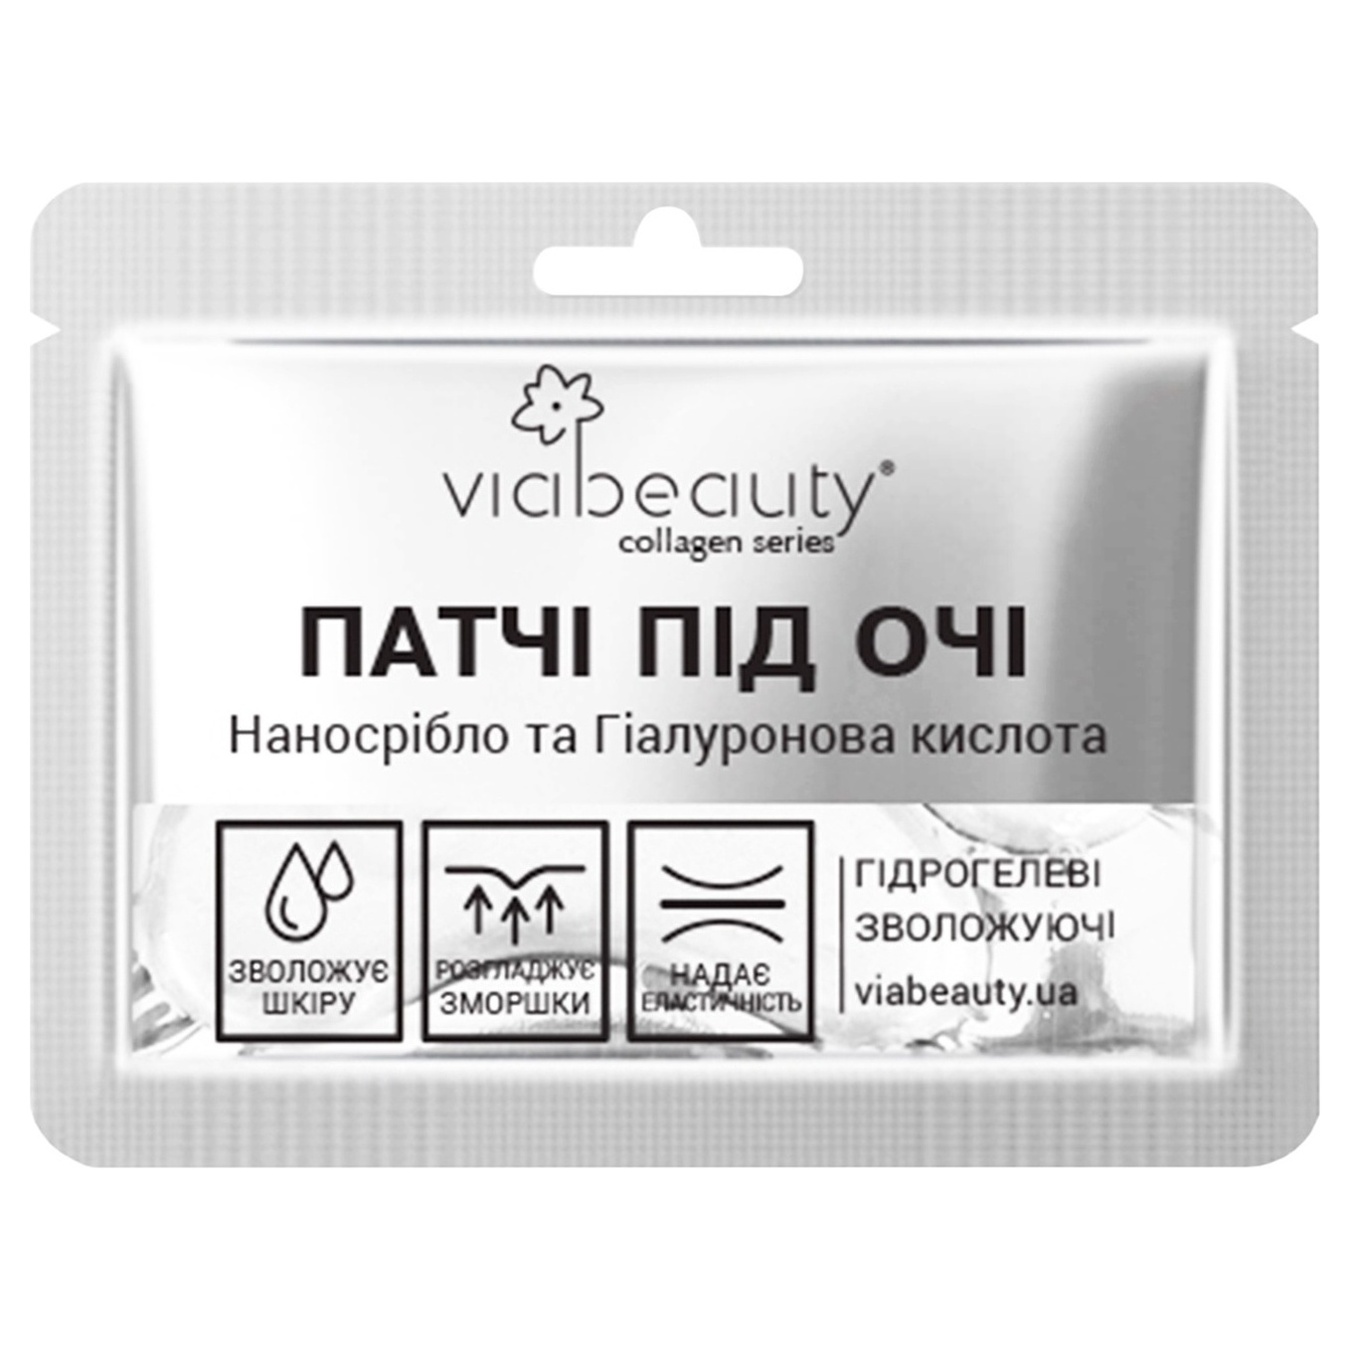 VIABEAUTY hydrogel moisturizing eye patches with nanosilver and hyaluronic acid